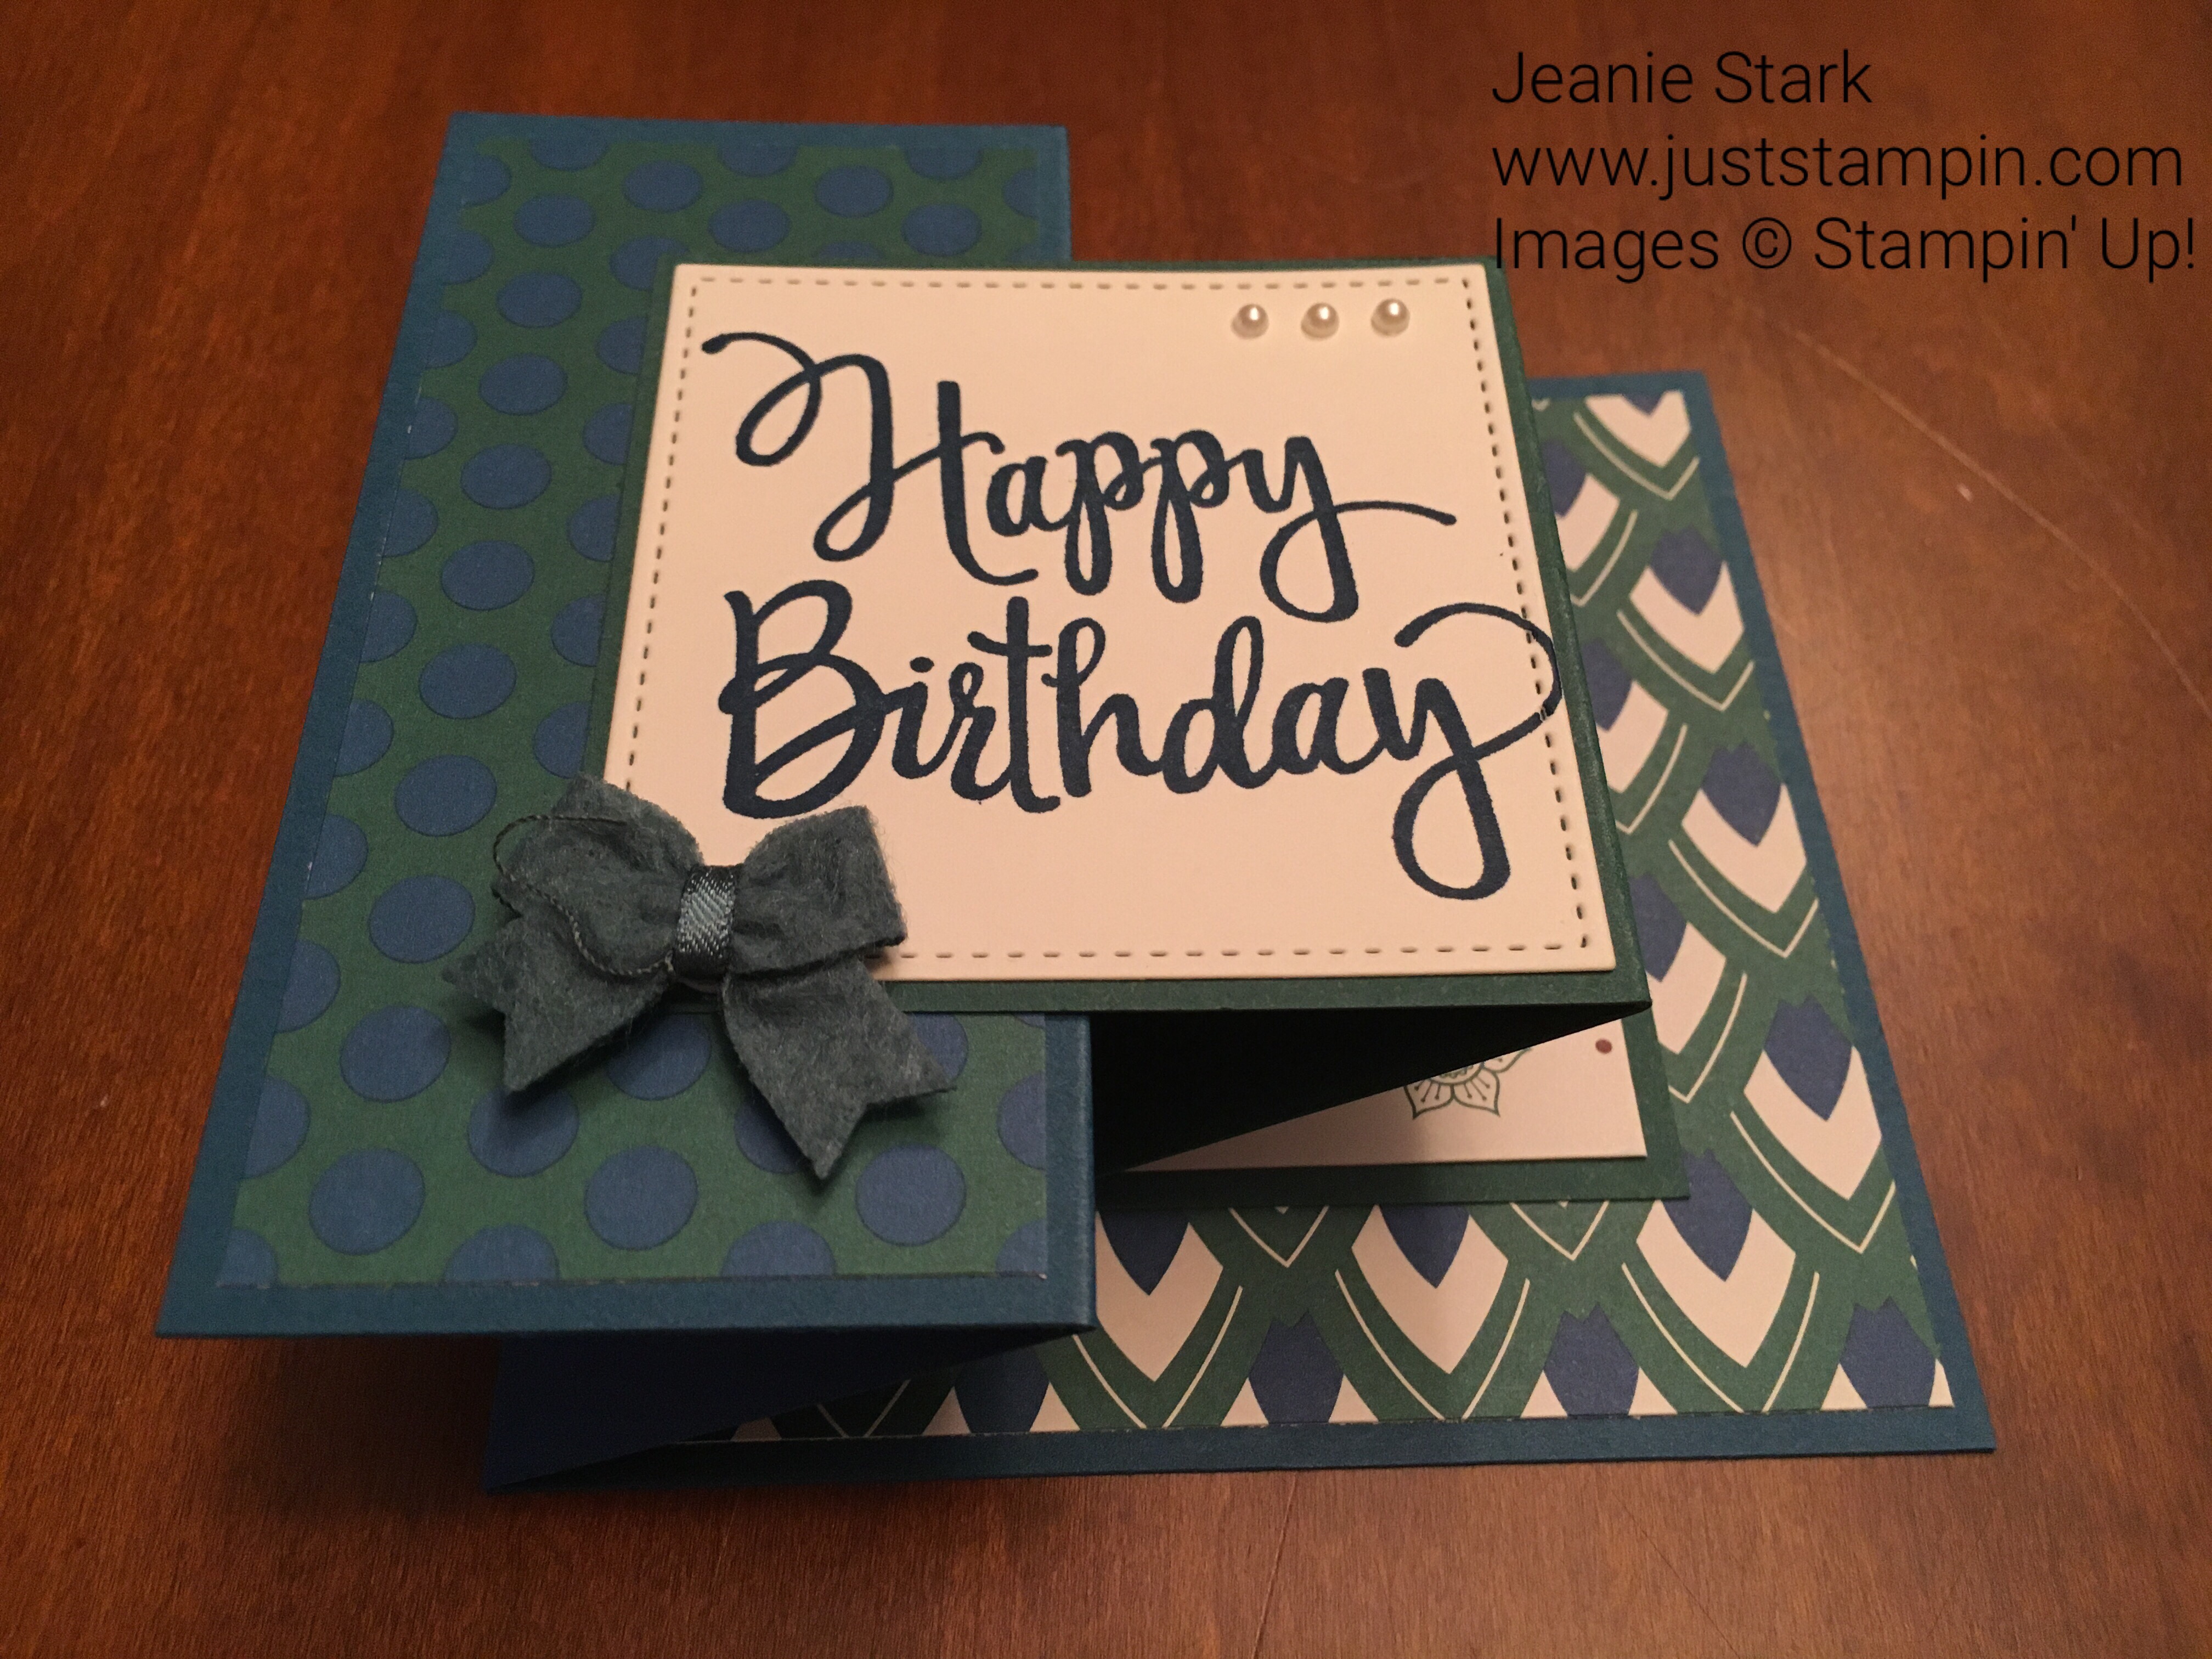 Fun fold birthday card using Eastern Palace Designer Series Paper and Stylized Birthday Stamp Set from Stampin Up. For inspiration, directions, and products visit my blog www.juststampin.com.